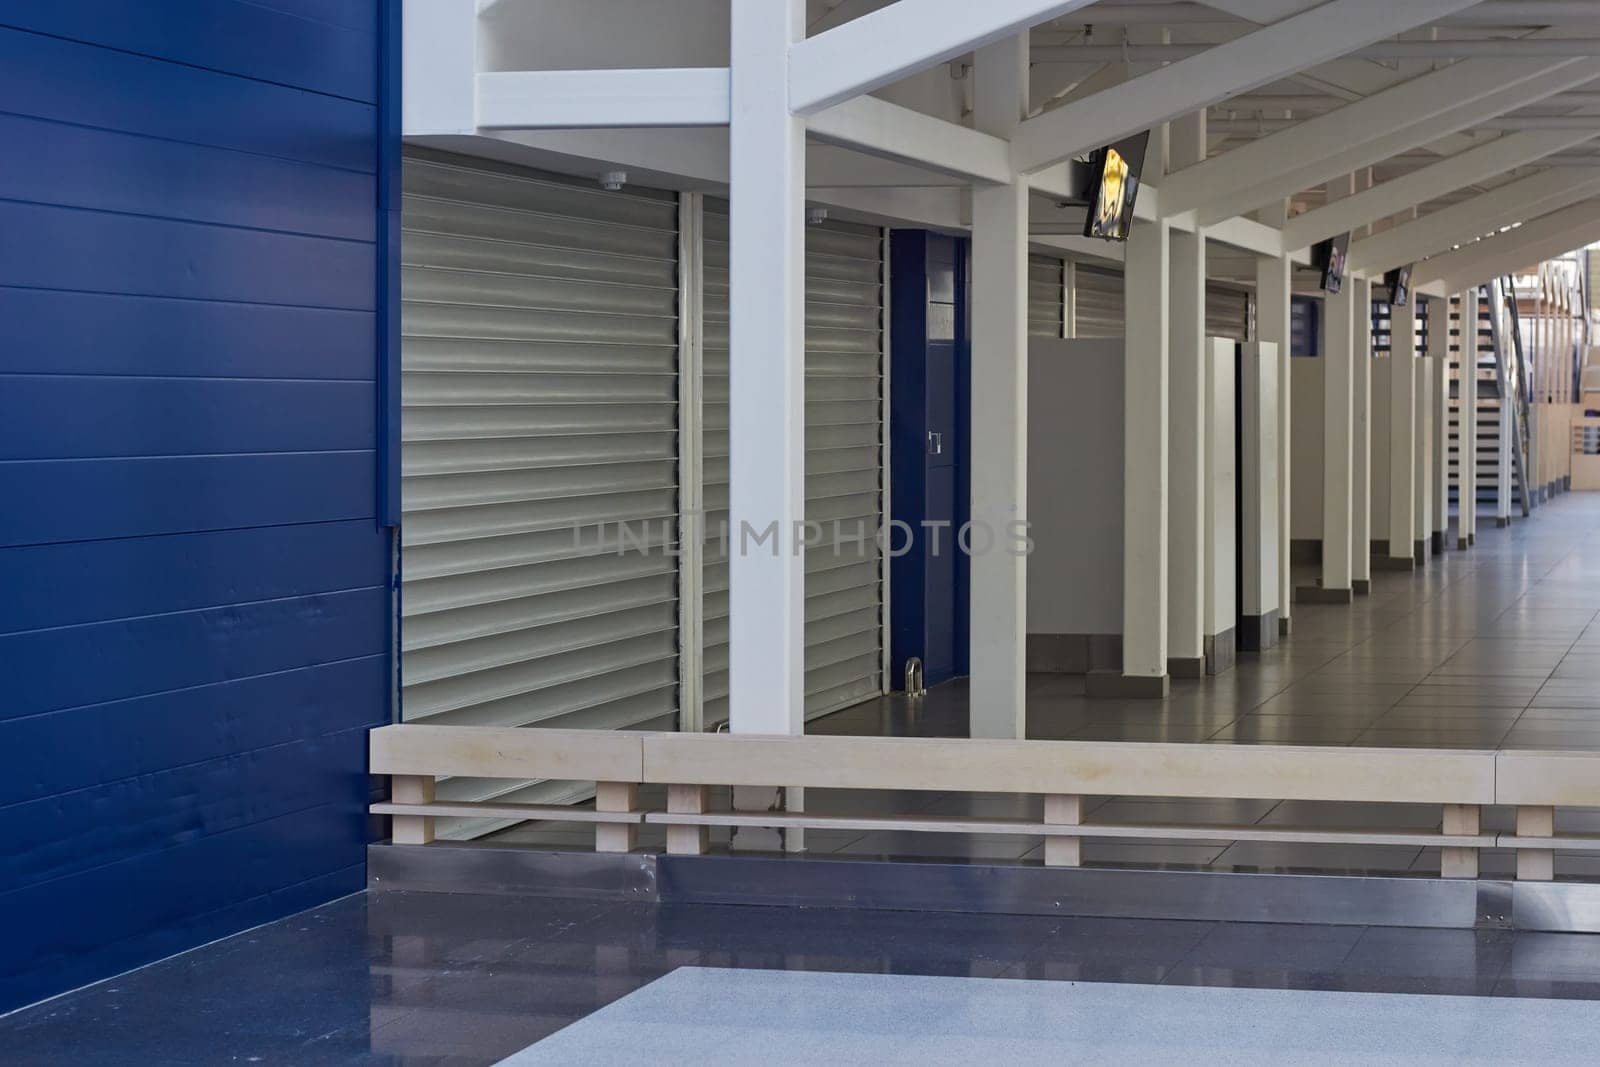 Closed retail space lowered roller shutters. Sales by electrovenik